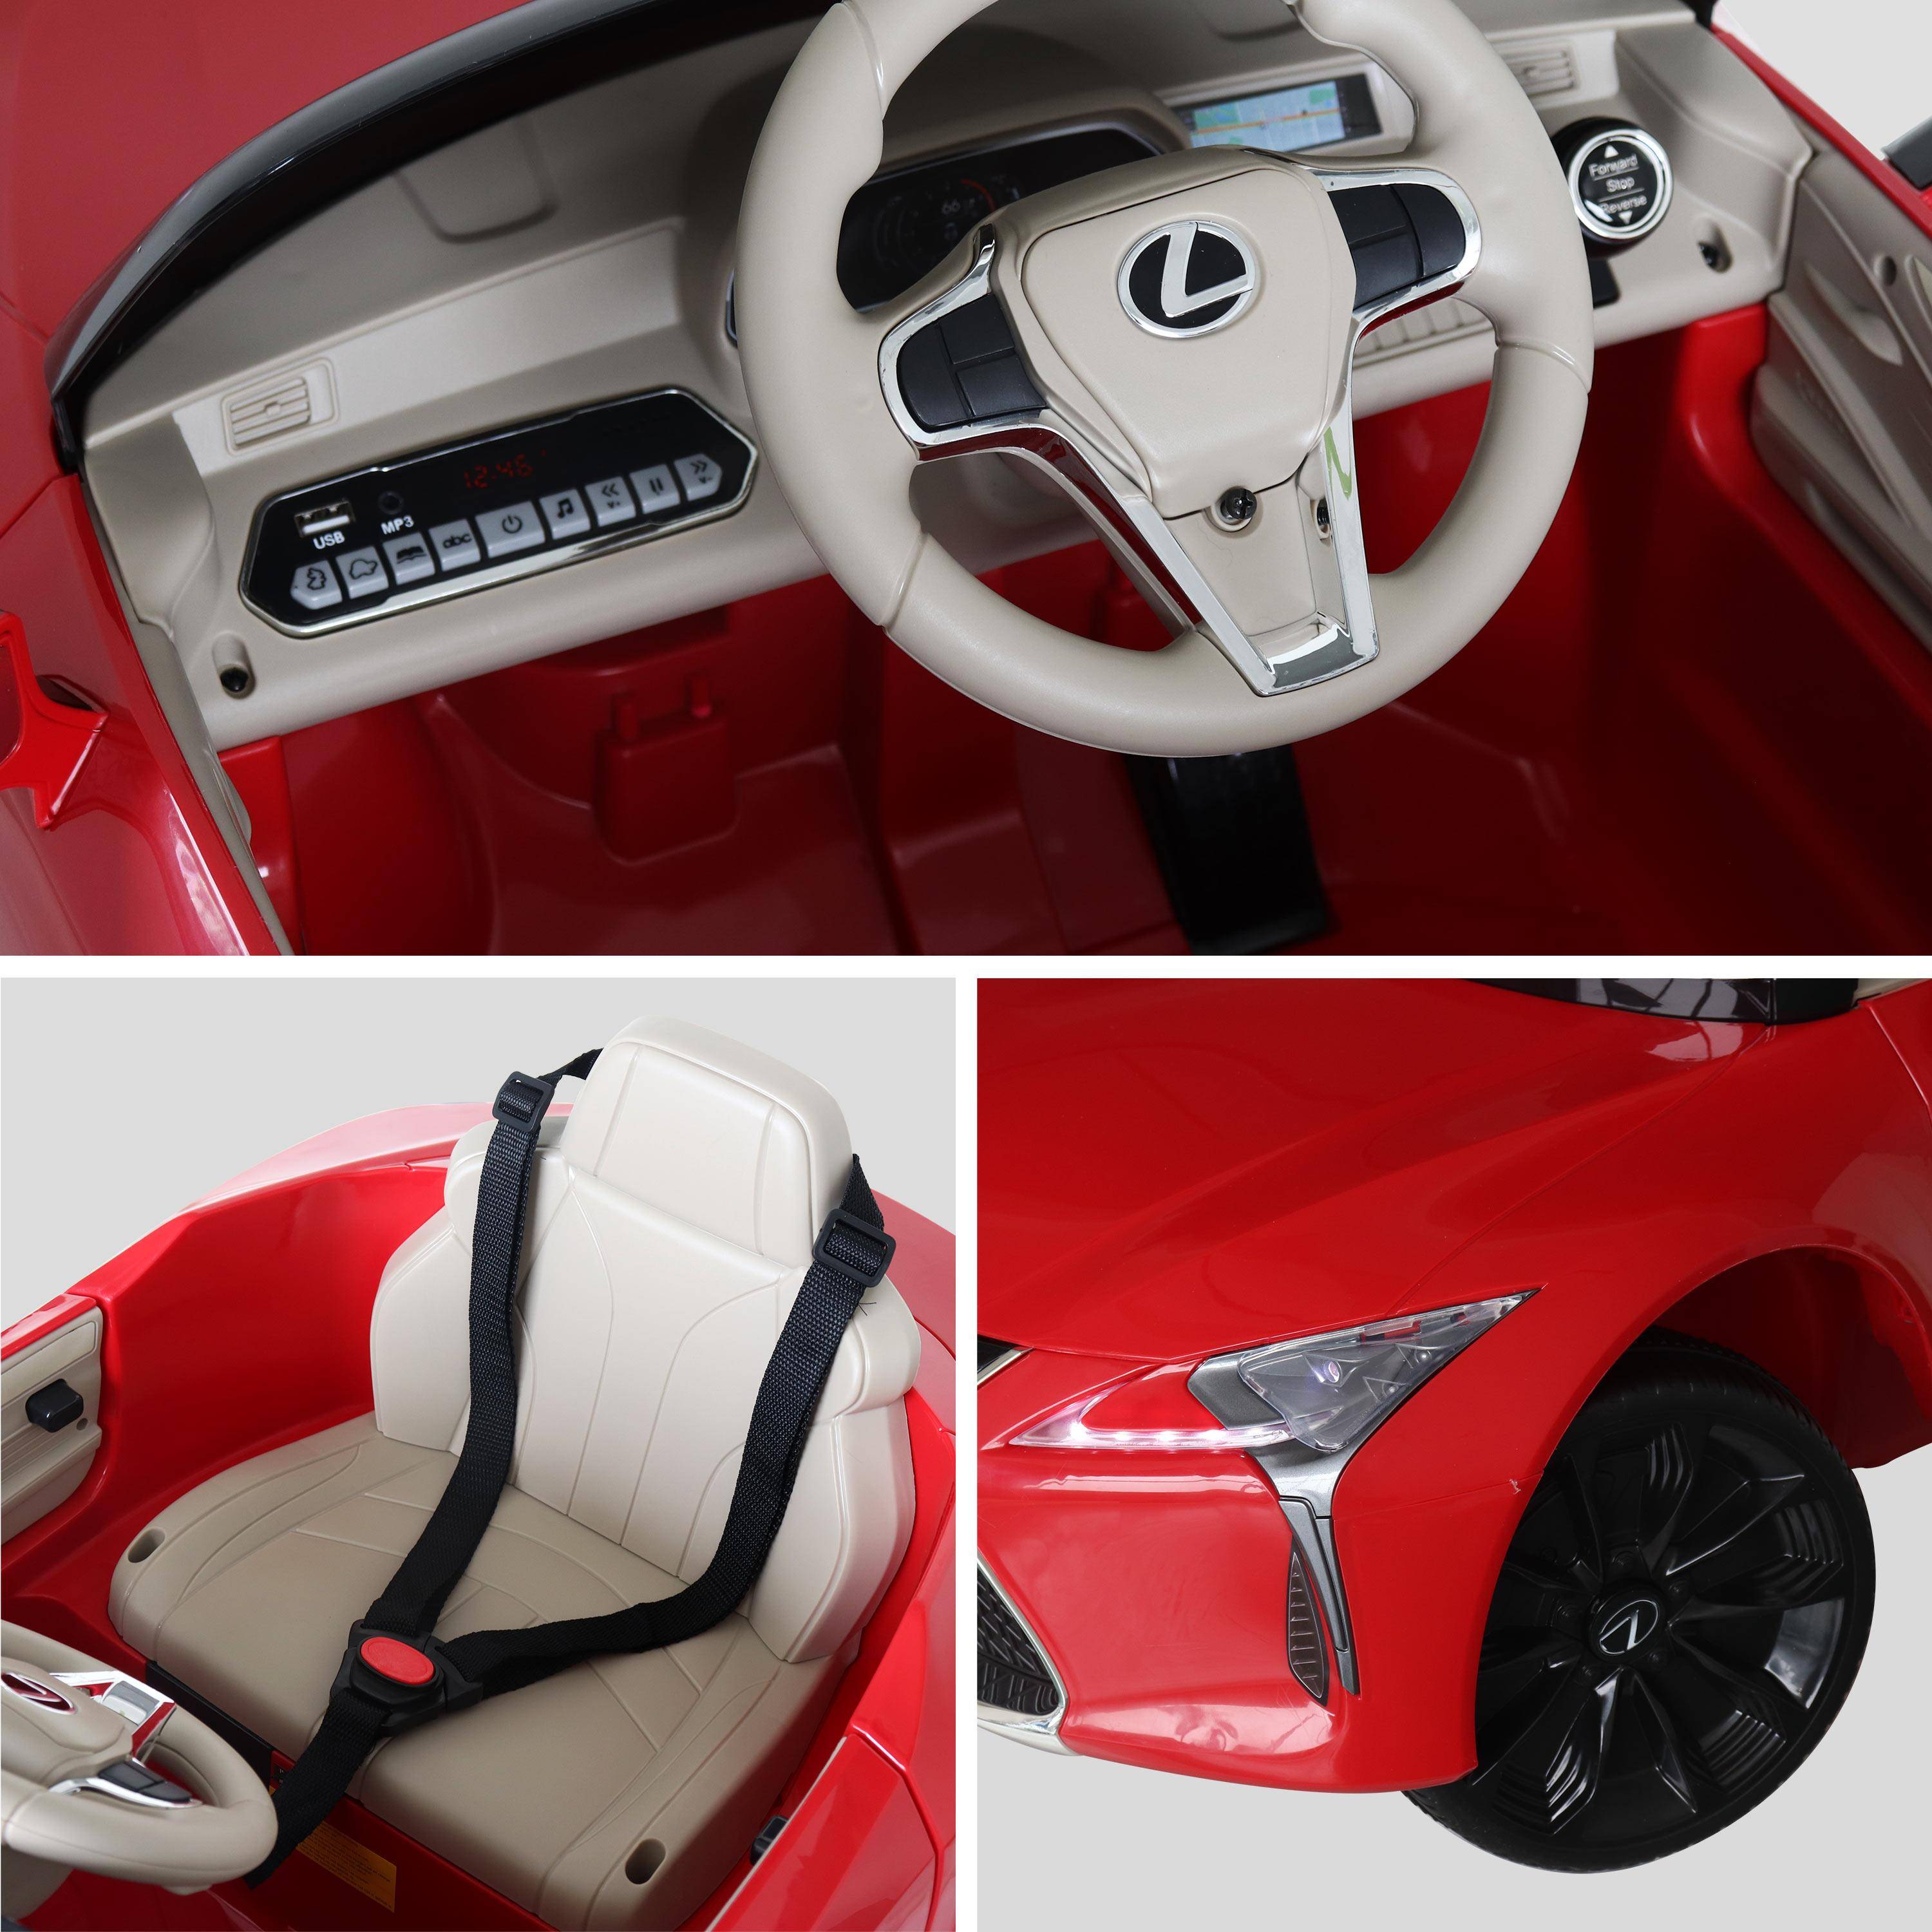 Children's electric car 12V, 1 seat, 4x4 with car radio and remote control - Lexus LC500 - Red,sweeek,Photo5